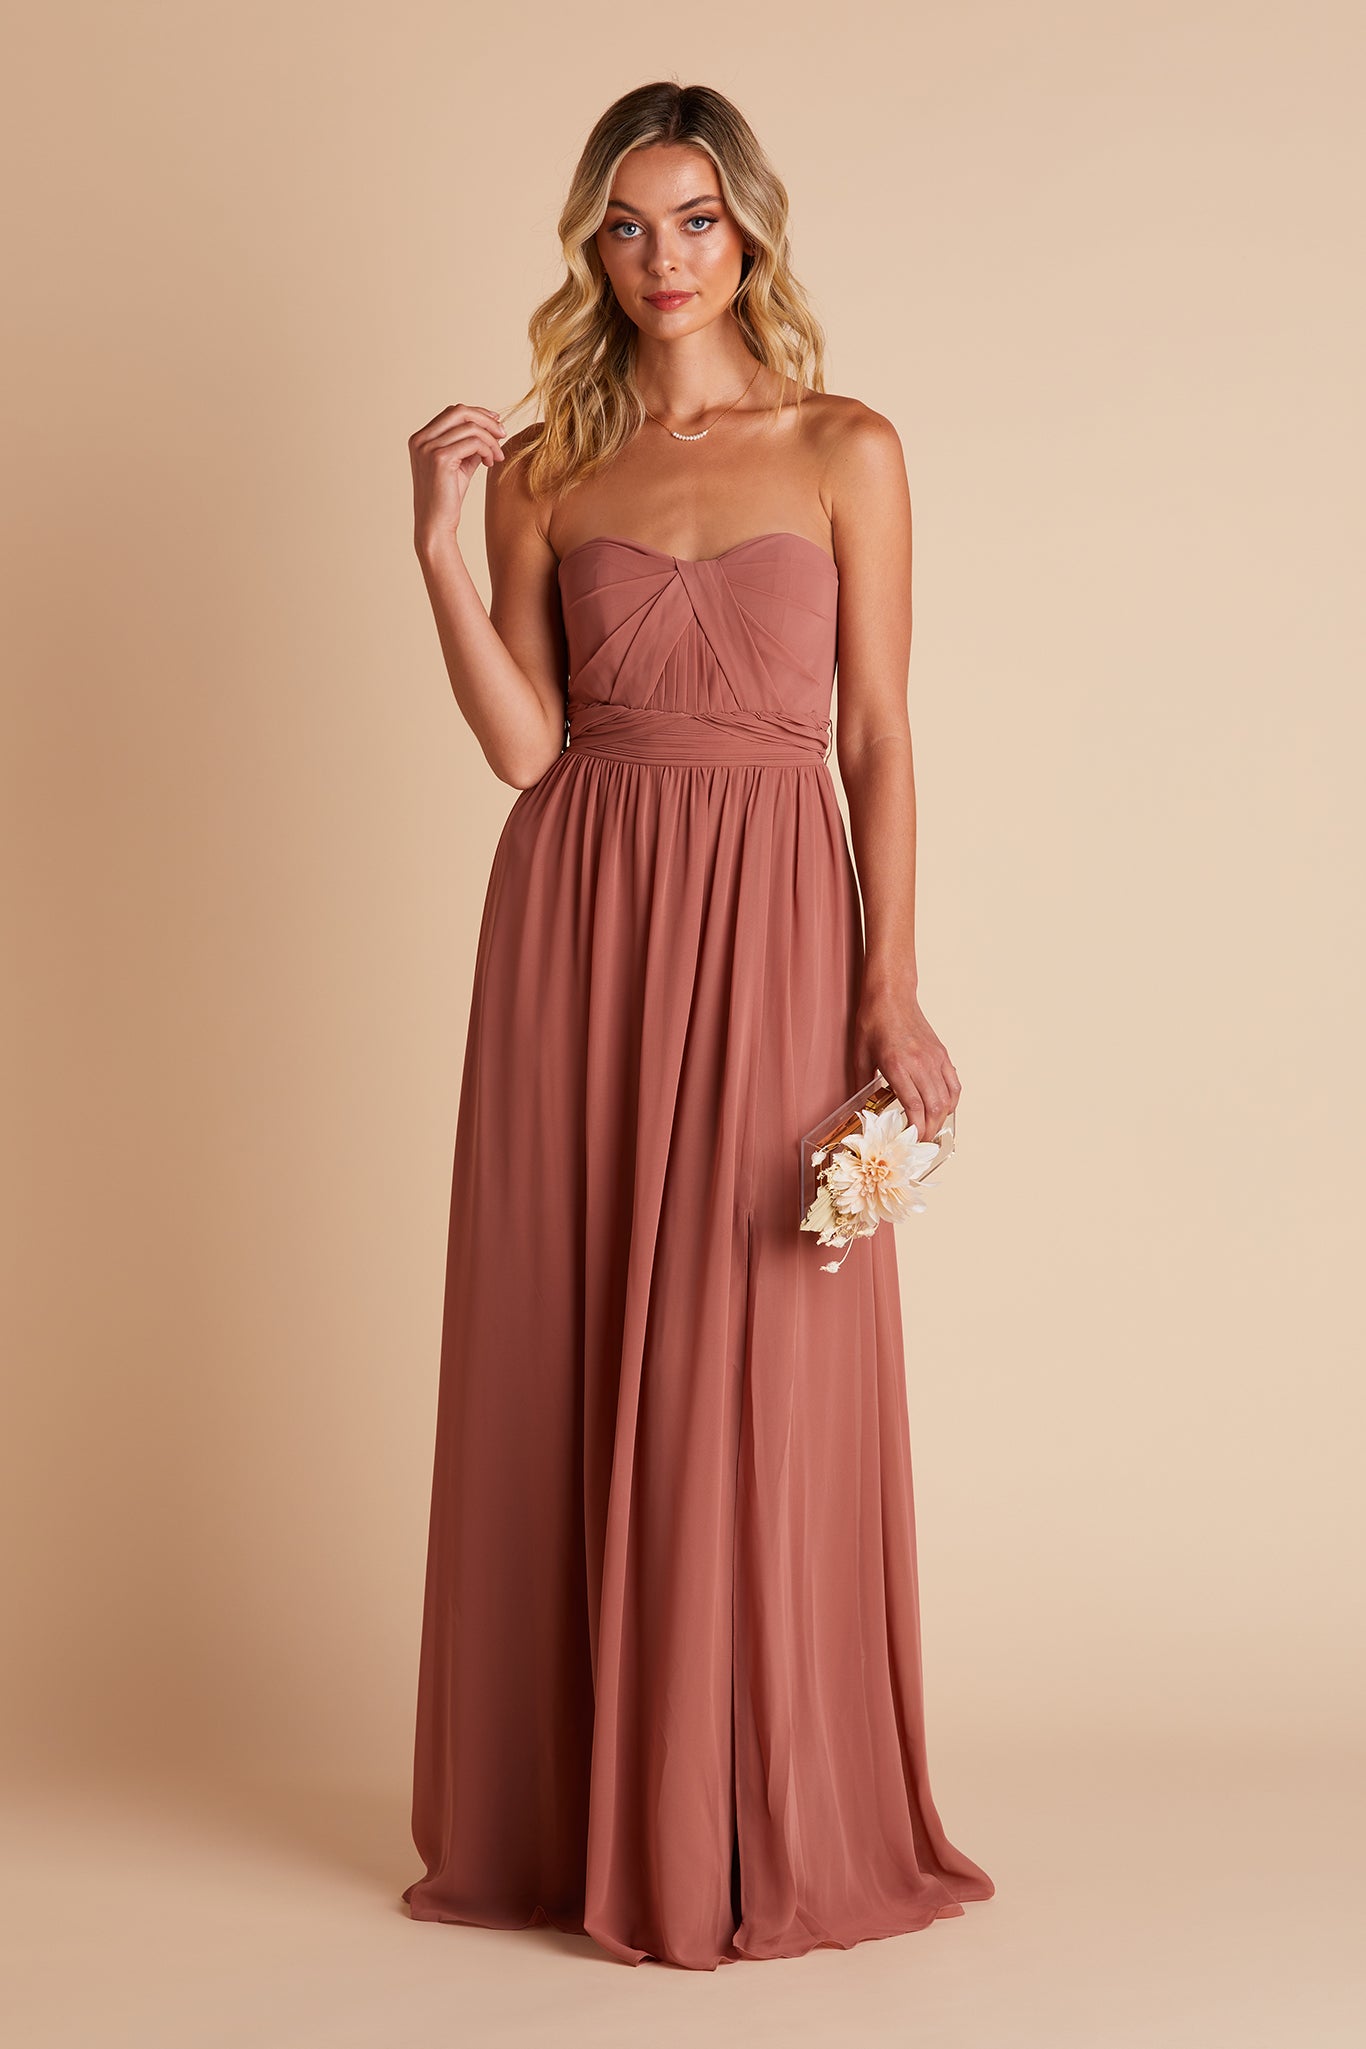 Grace convertible bridesmaid dress with slit in desert rose by Birdy Grey, front view